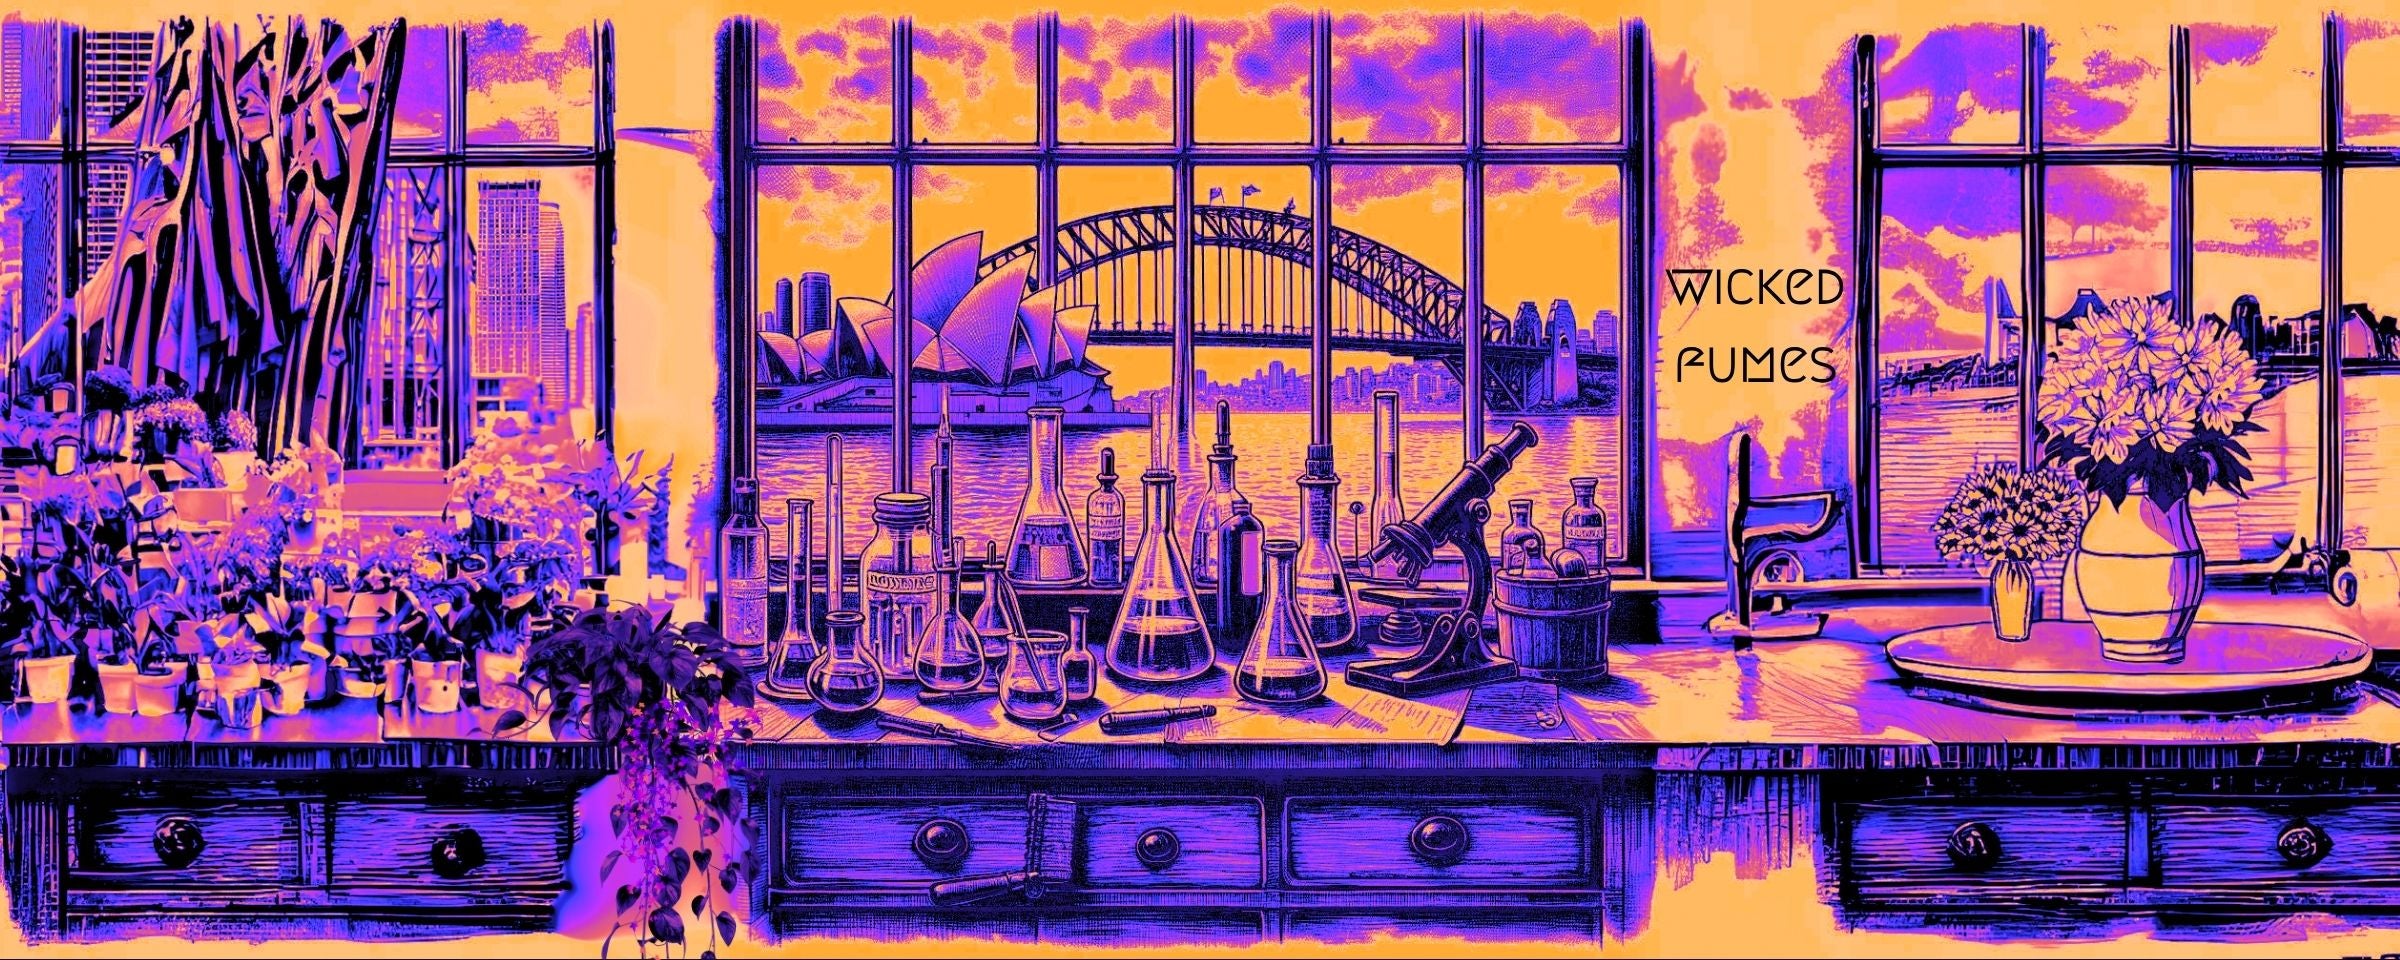 Illustration of an office overlooking sydney harbour with pipettes and beakers on a wooden bench